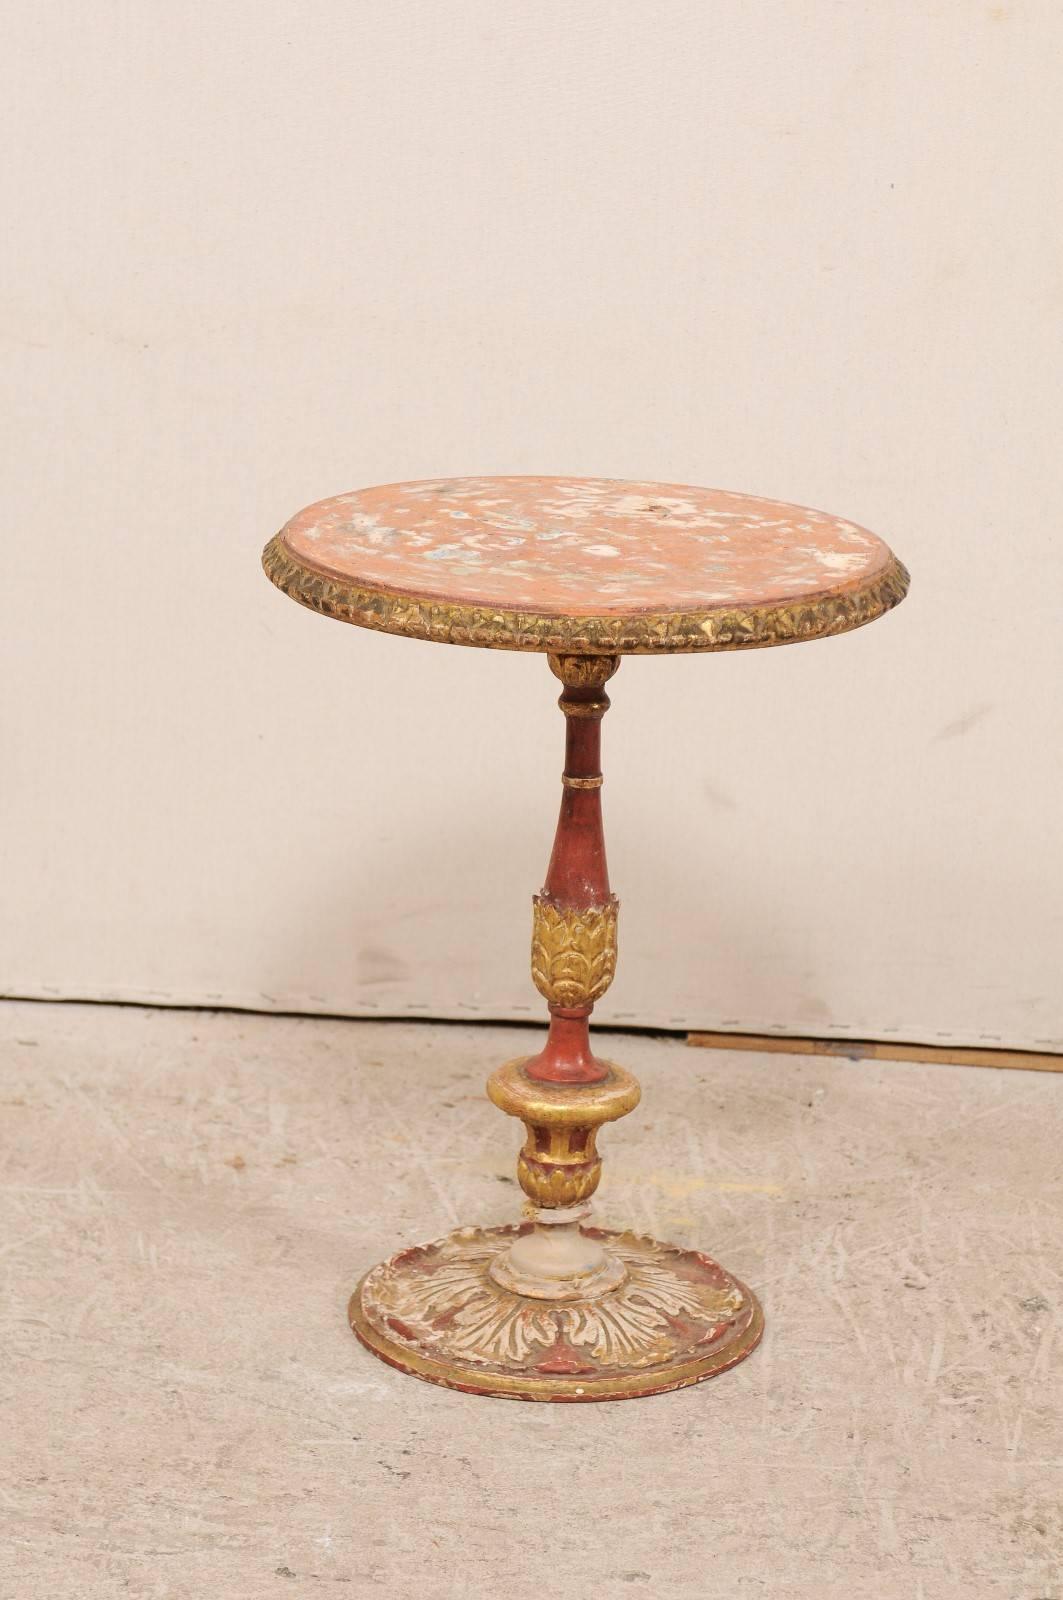 An Italian early 20th century round pedestal painted and carved wood table. This antique Italian round-shaped table features a beautifully carved acanthus leaf motif about the central column and floor base. The top is edged in an egg and dart styled